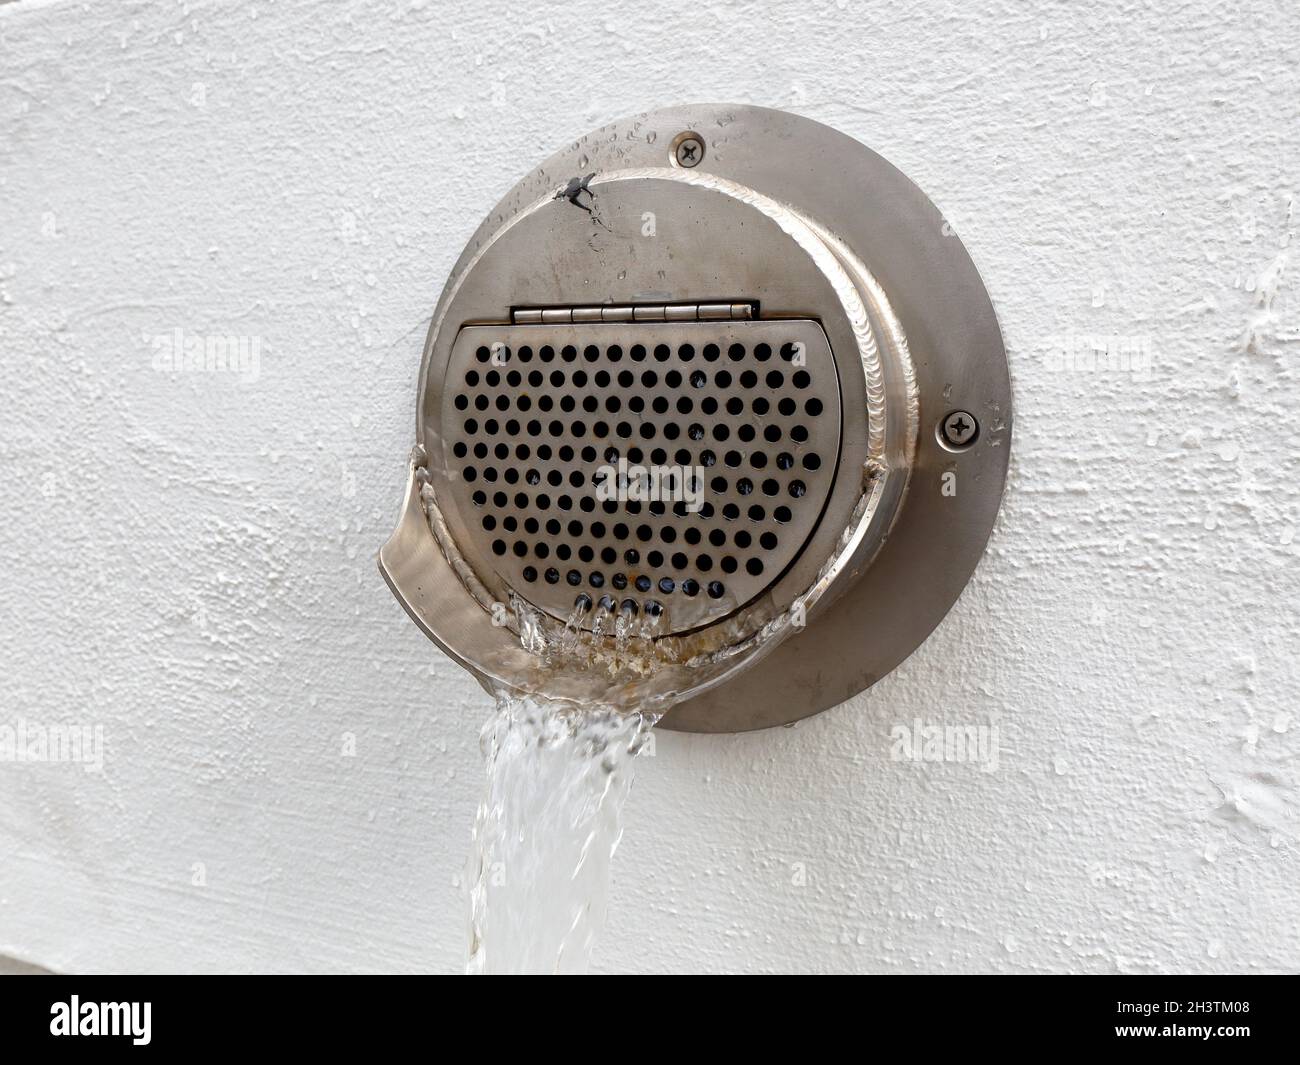 Water pouring from a downspout nozzle on the side of a building during a rain storm. Stock Photo